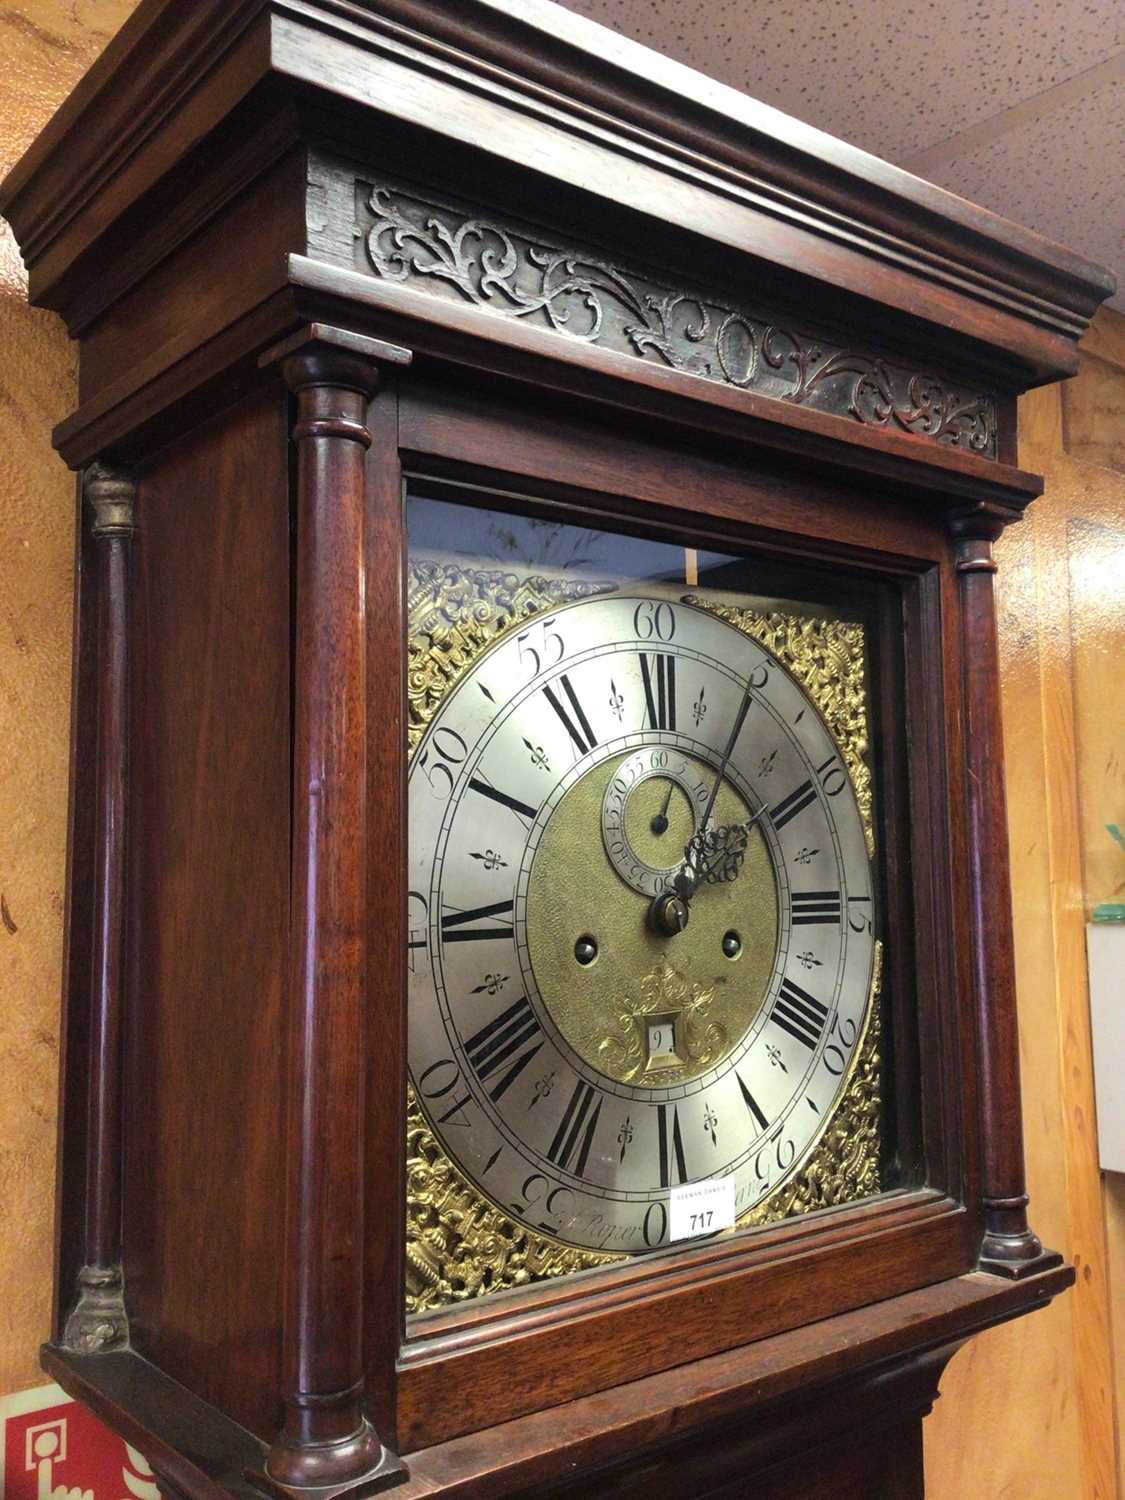 Mid 18th century 8 day longcase clock by Samuel Roper, Crewkerne - Image 2 of 7